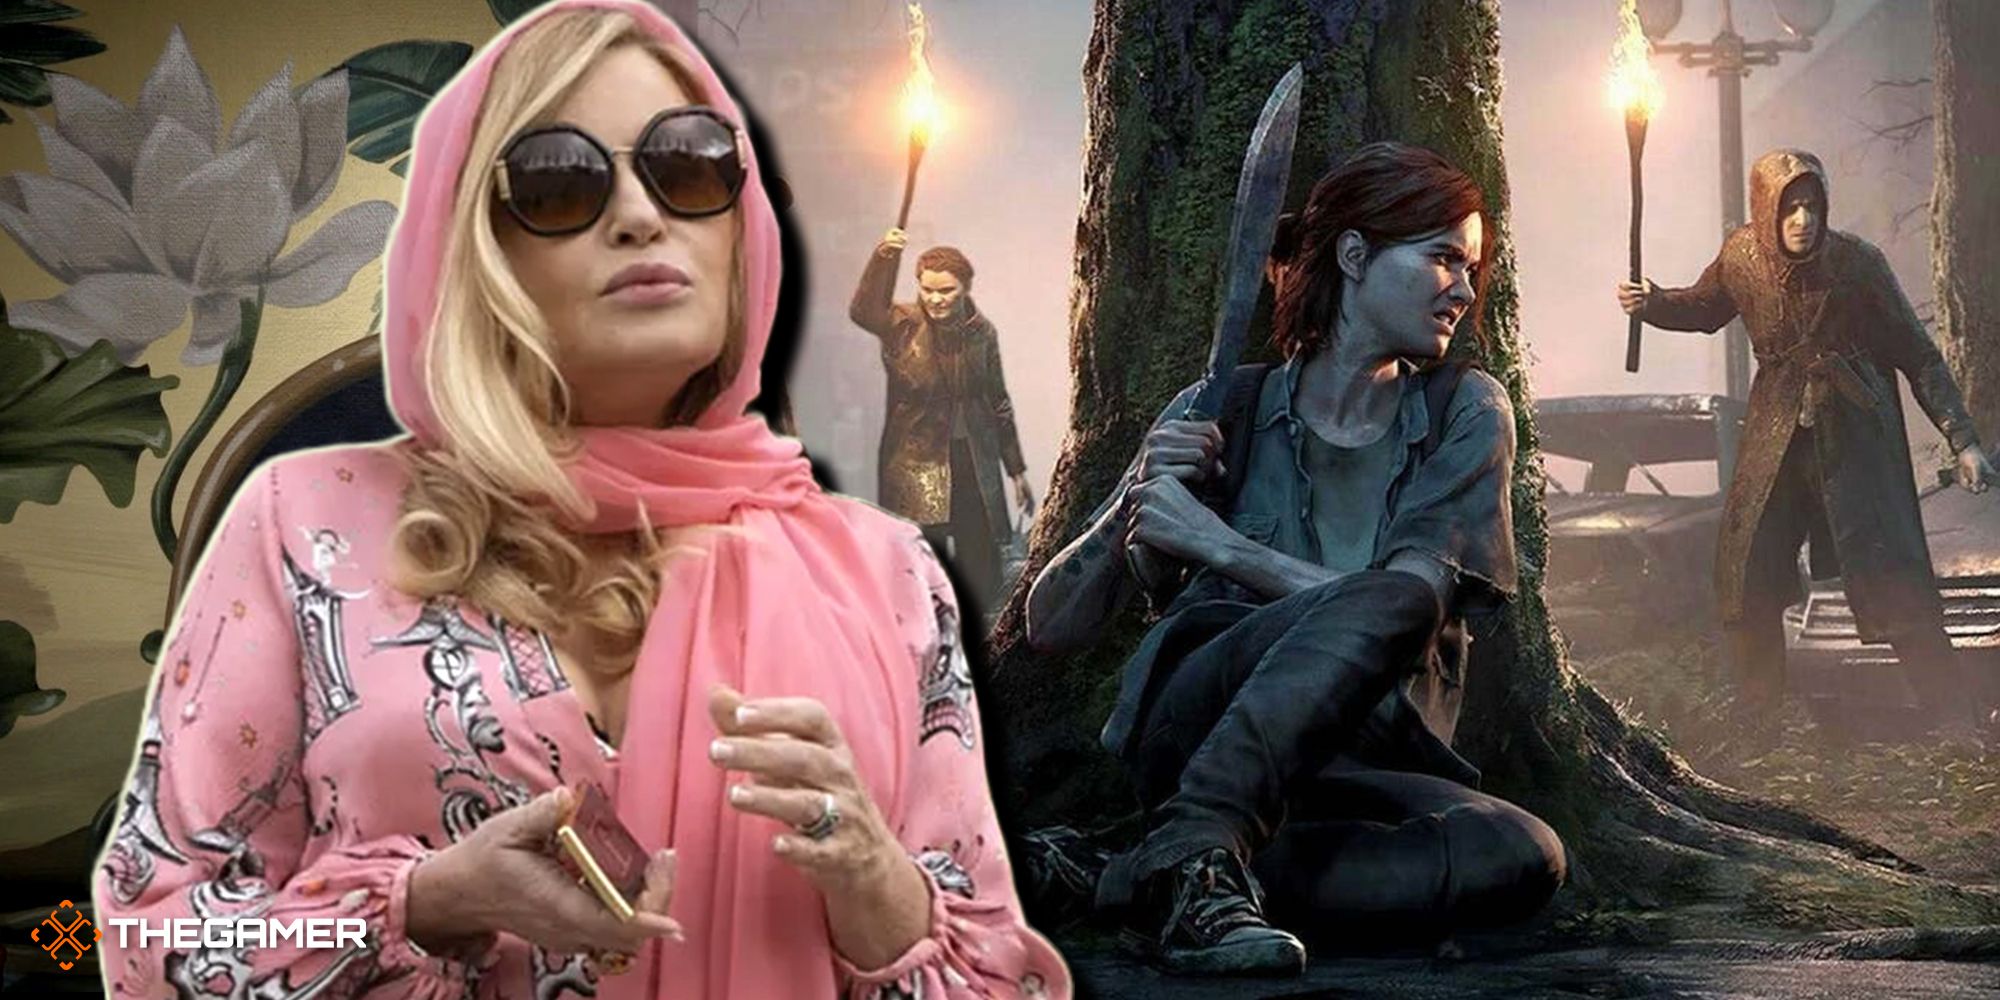 Jennifer Coolidge over a painting of a white lotus on the left, Ellie from The Last of Us 2 wielding a giant knife and hiding behind a tree from Seraphims holding torches on the right